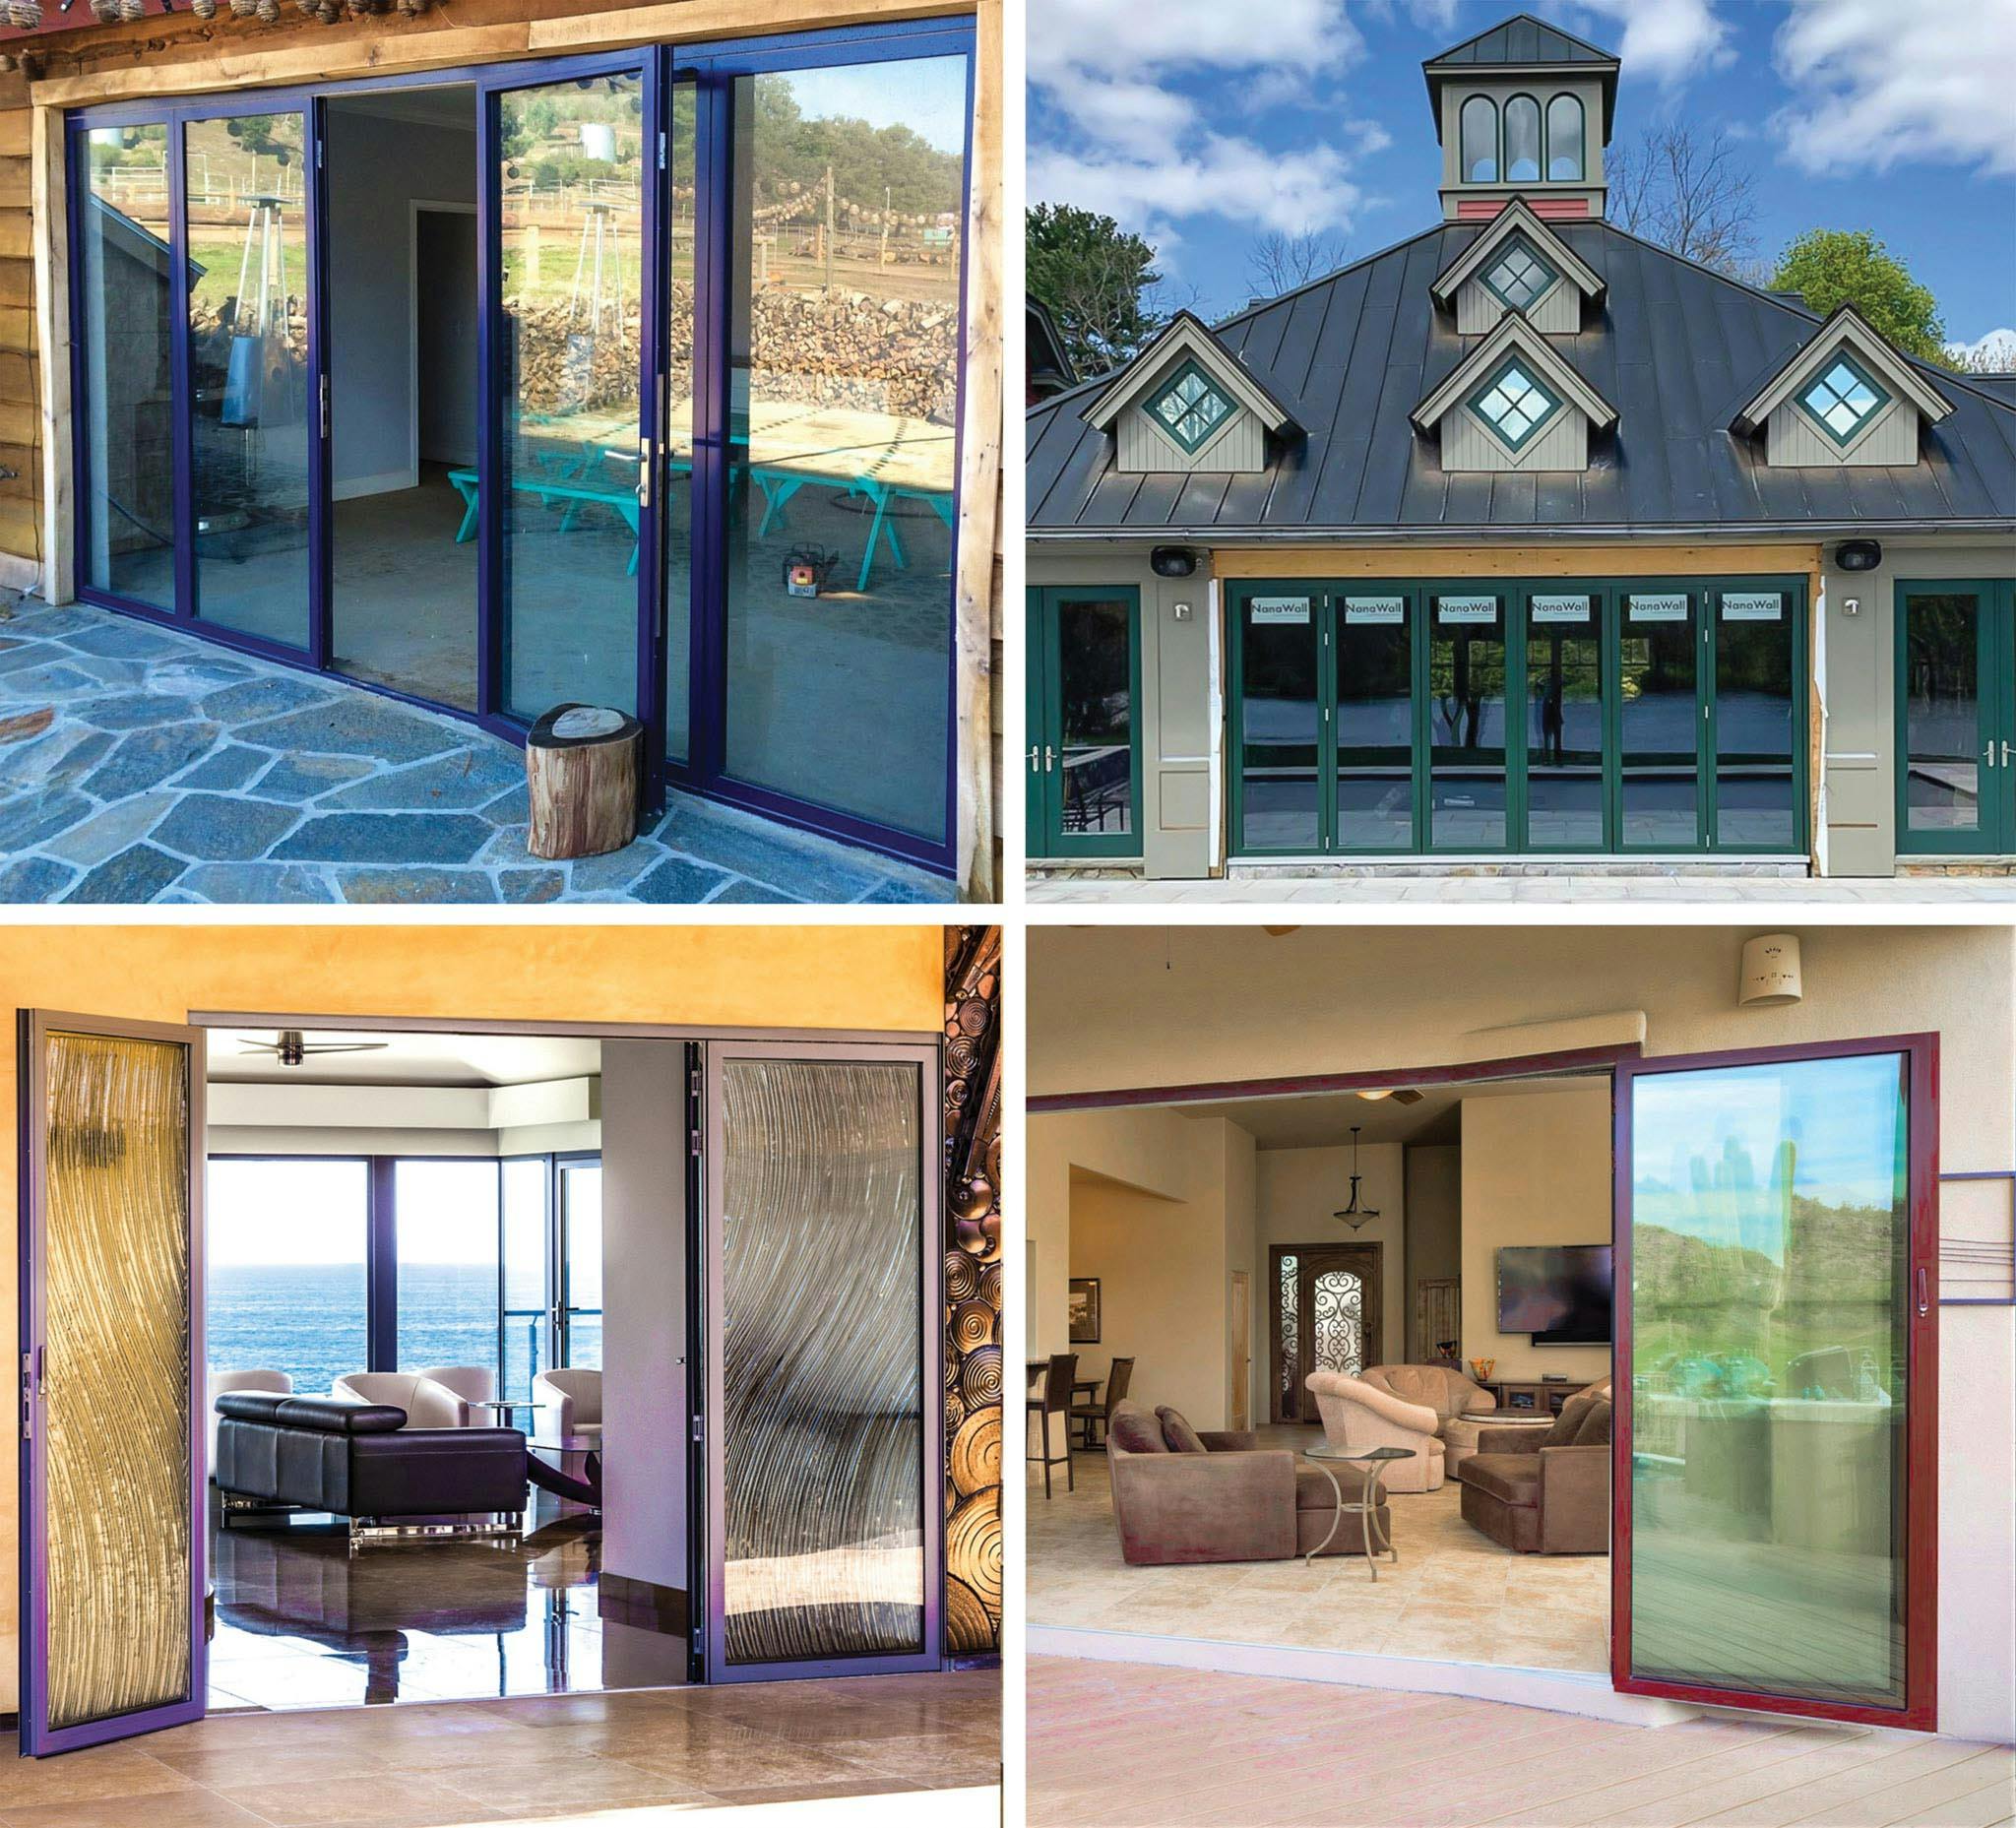 residential projects with colorful glass wall systems with powder coating finish